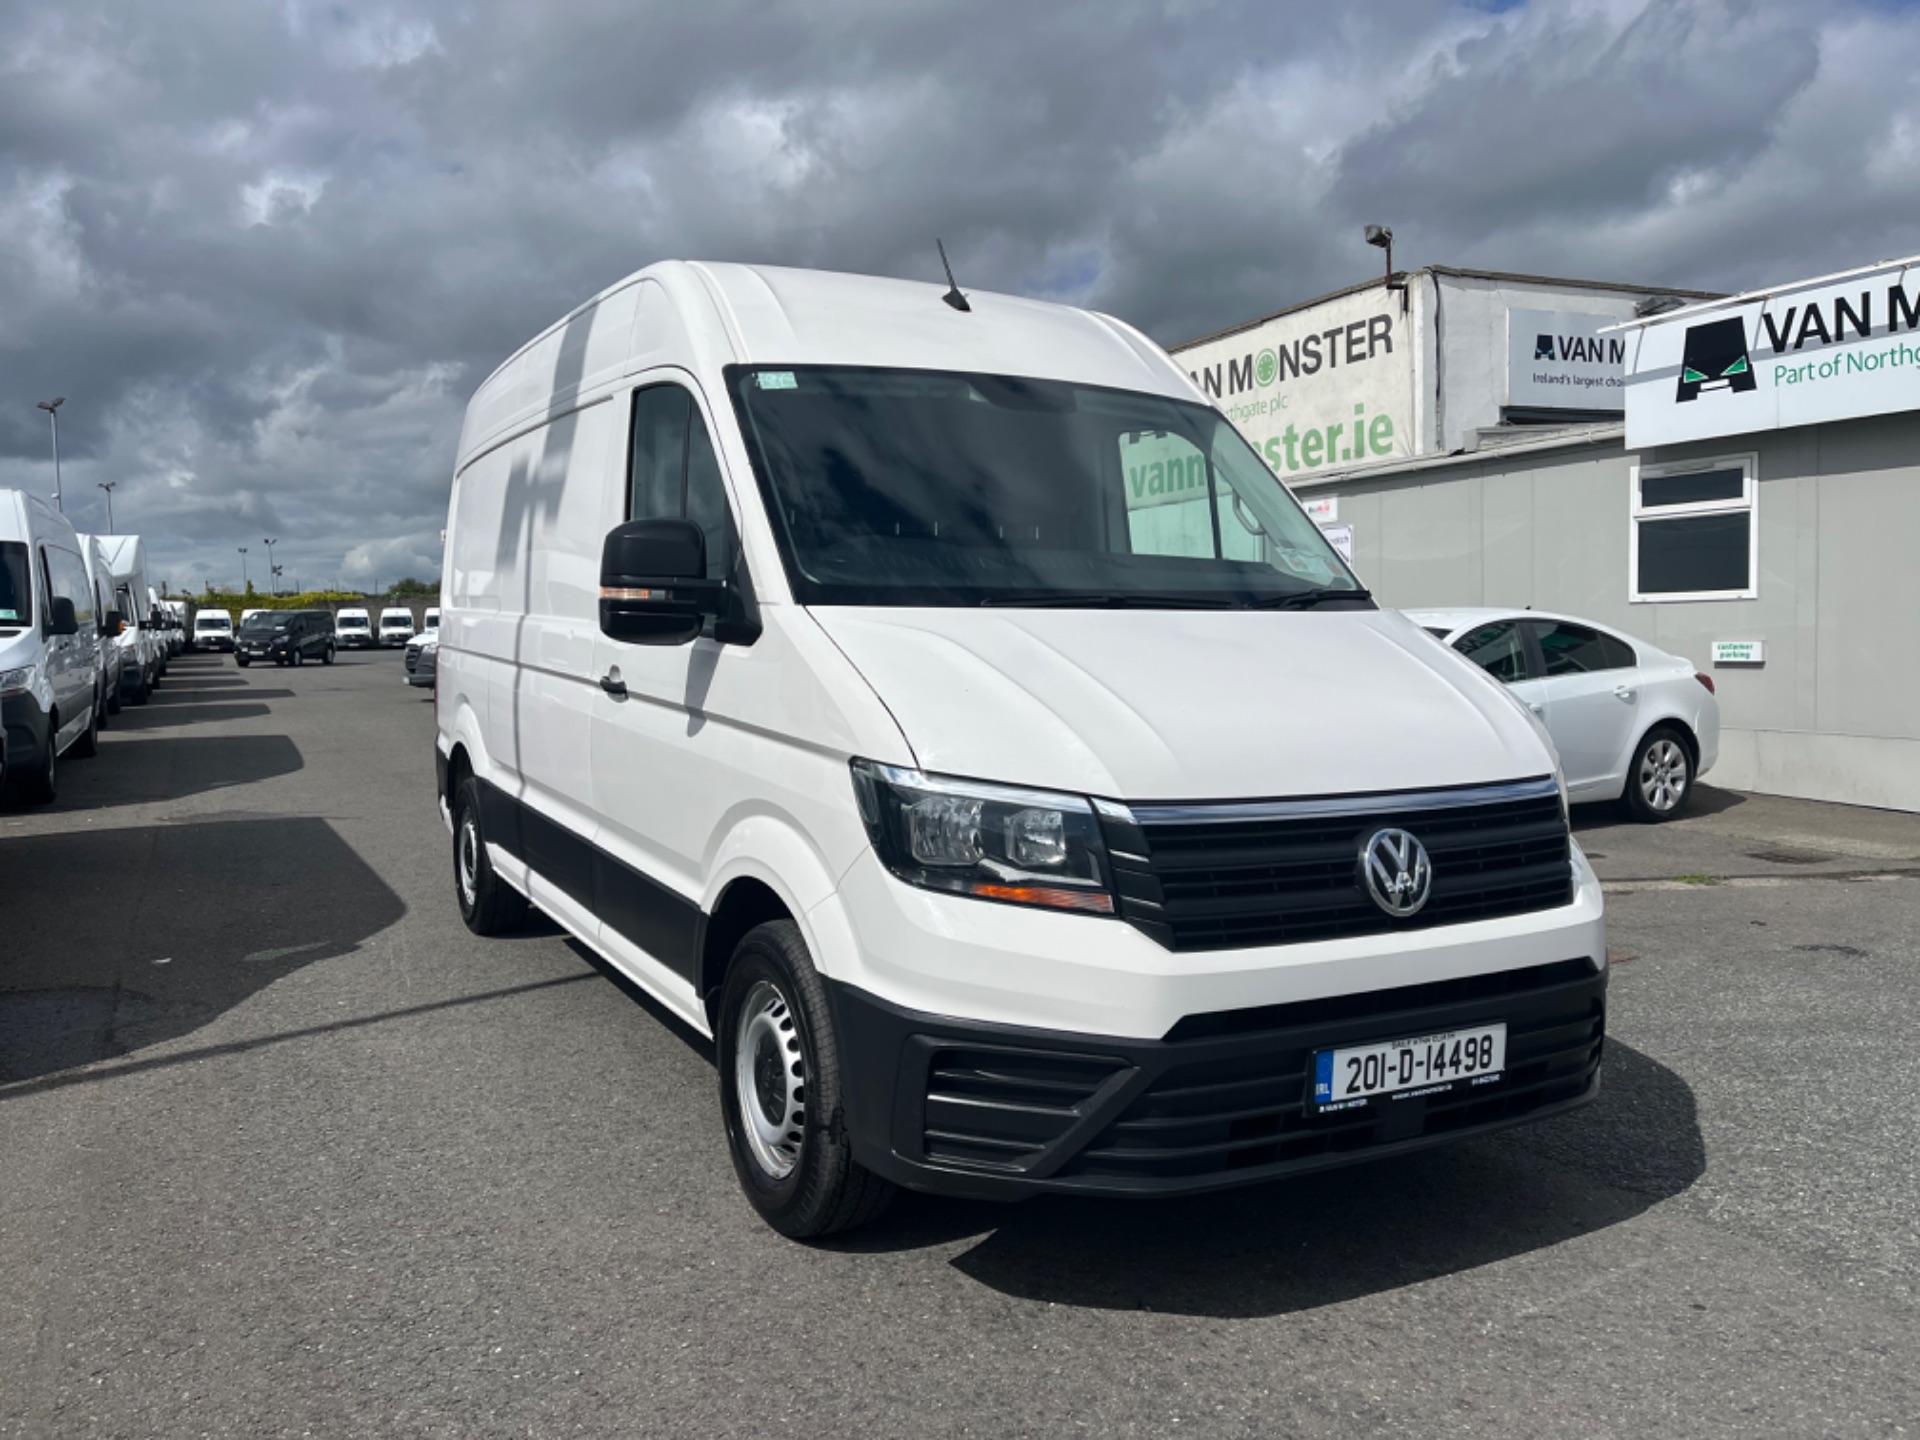 2020 Volkswagen Crafter 35 MWB 140HP M6F 5DR (201D14498) Thumbnail 1